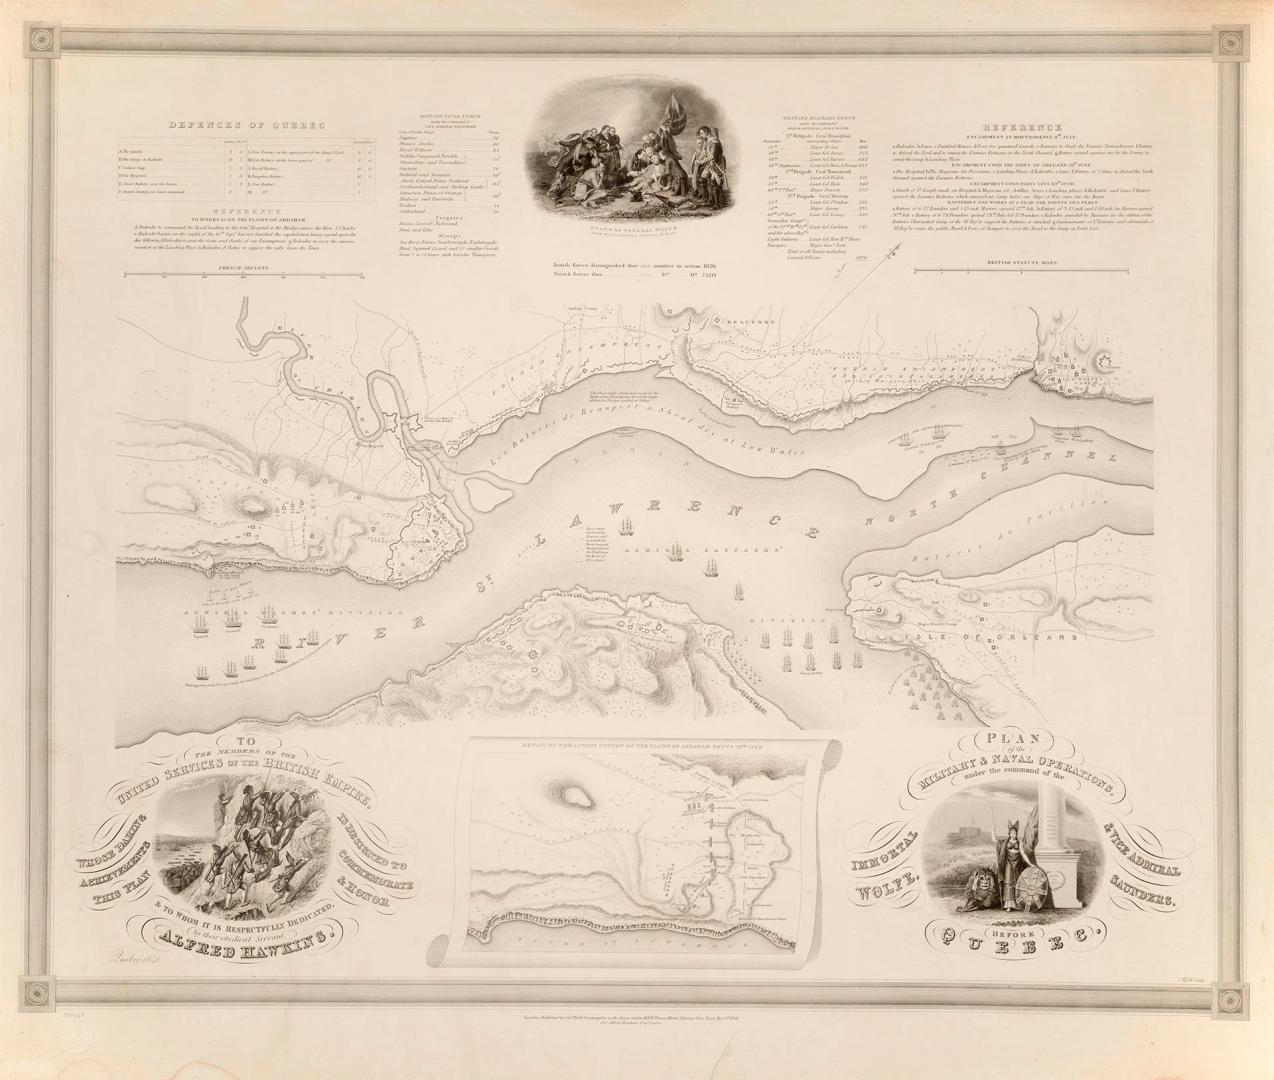 Plan of the Military & Naval Operations, under the Command of the Immortal Wolfe, & Vice Admiral Saunders, before Quebec (Quebec, 1759)